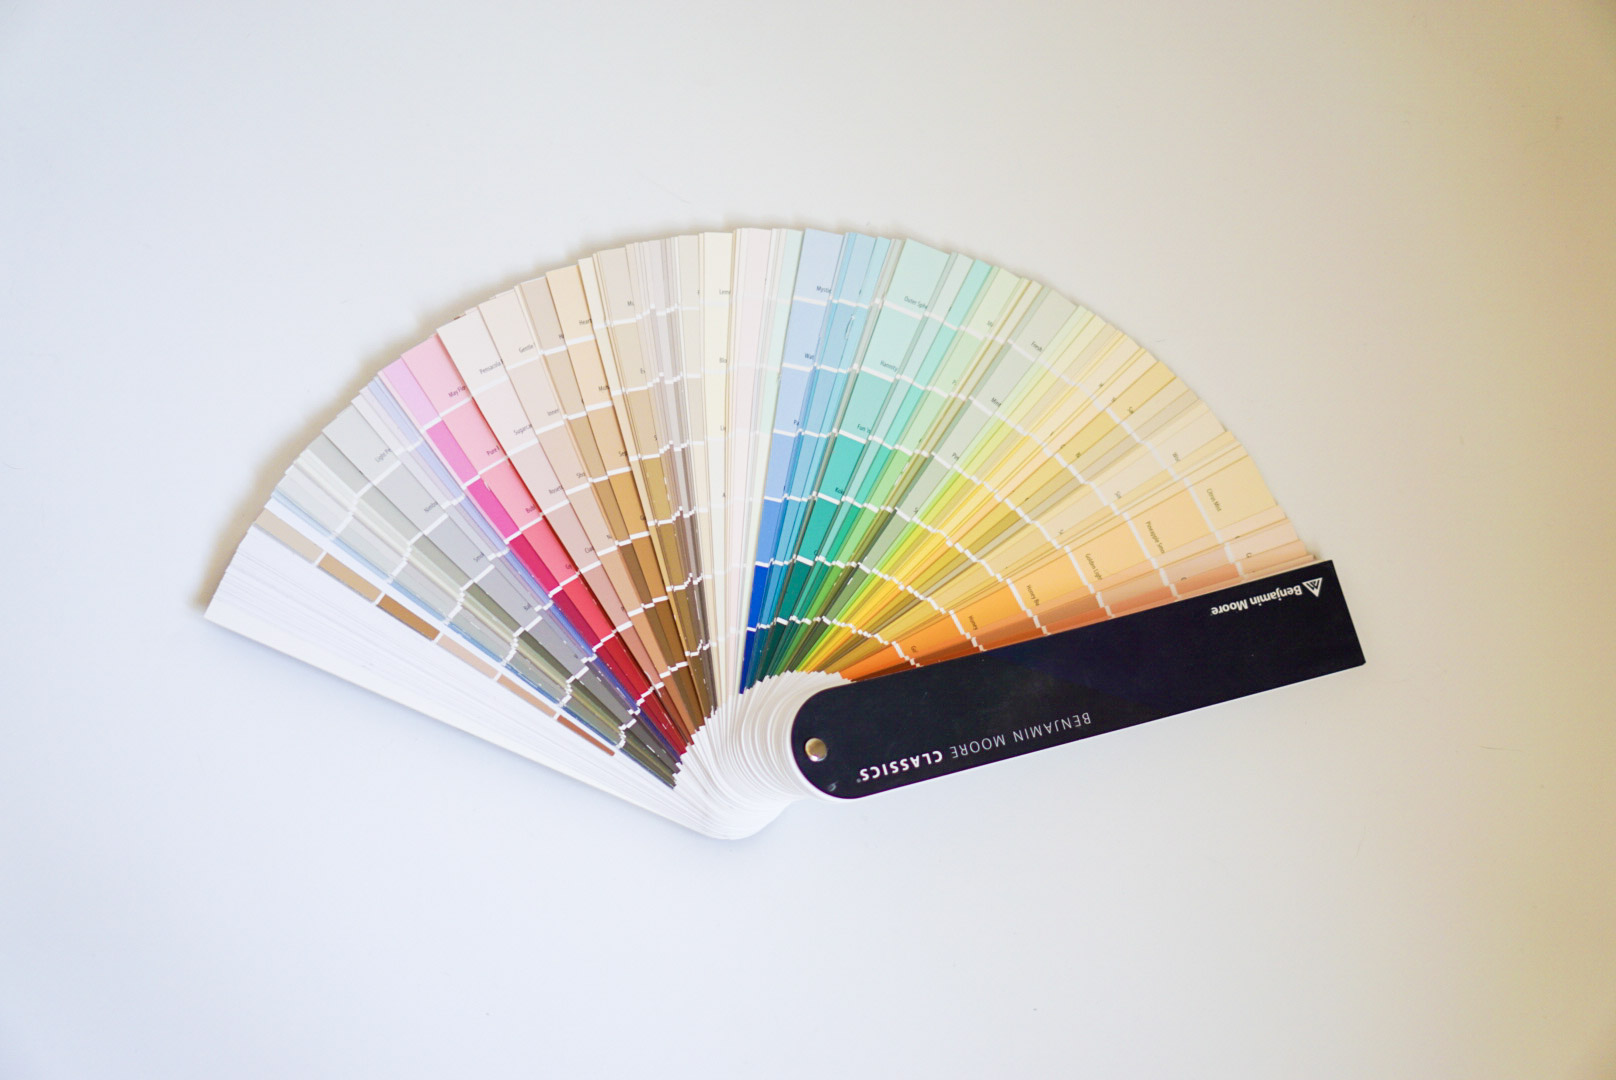 Benjamin Moore color wheel supplied by Long Island Painters to help customers find the perfect color